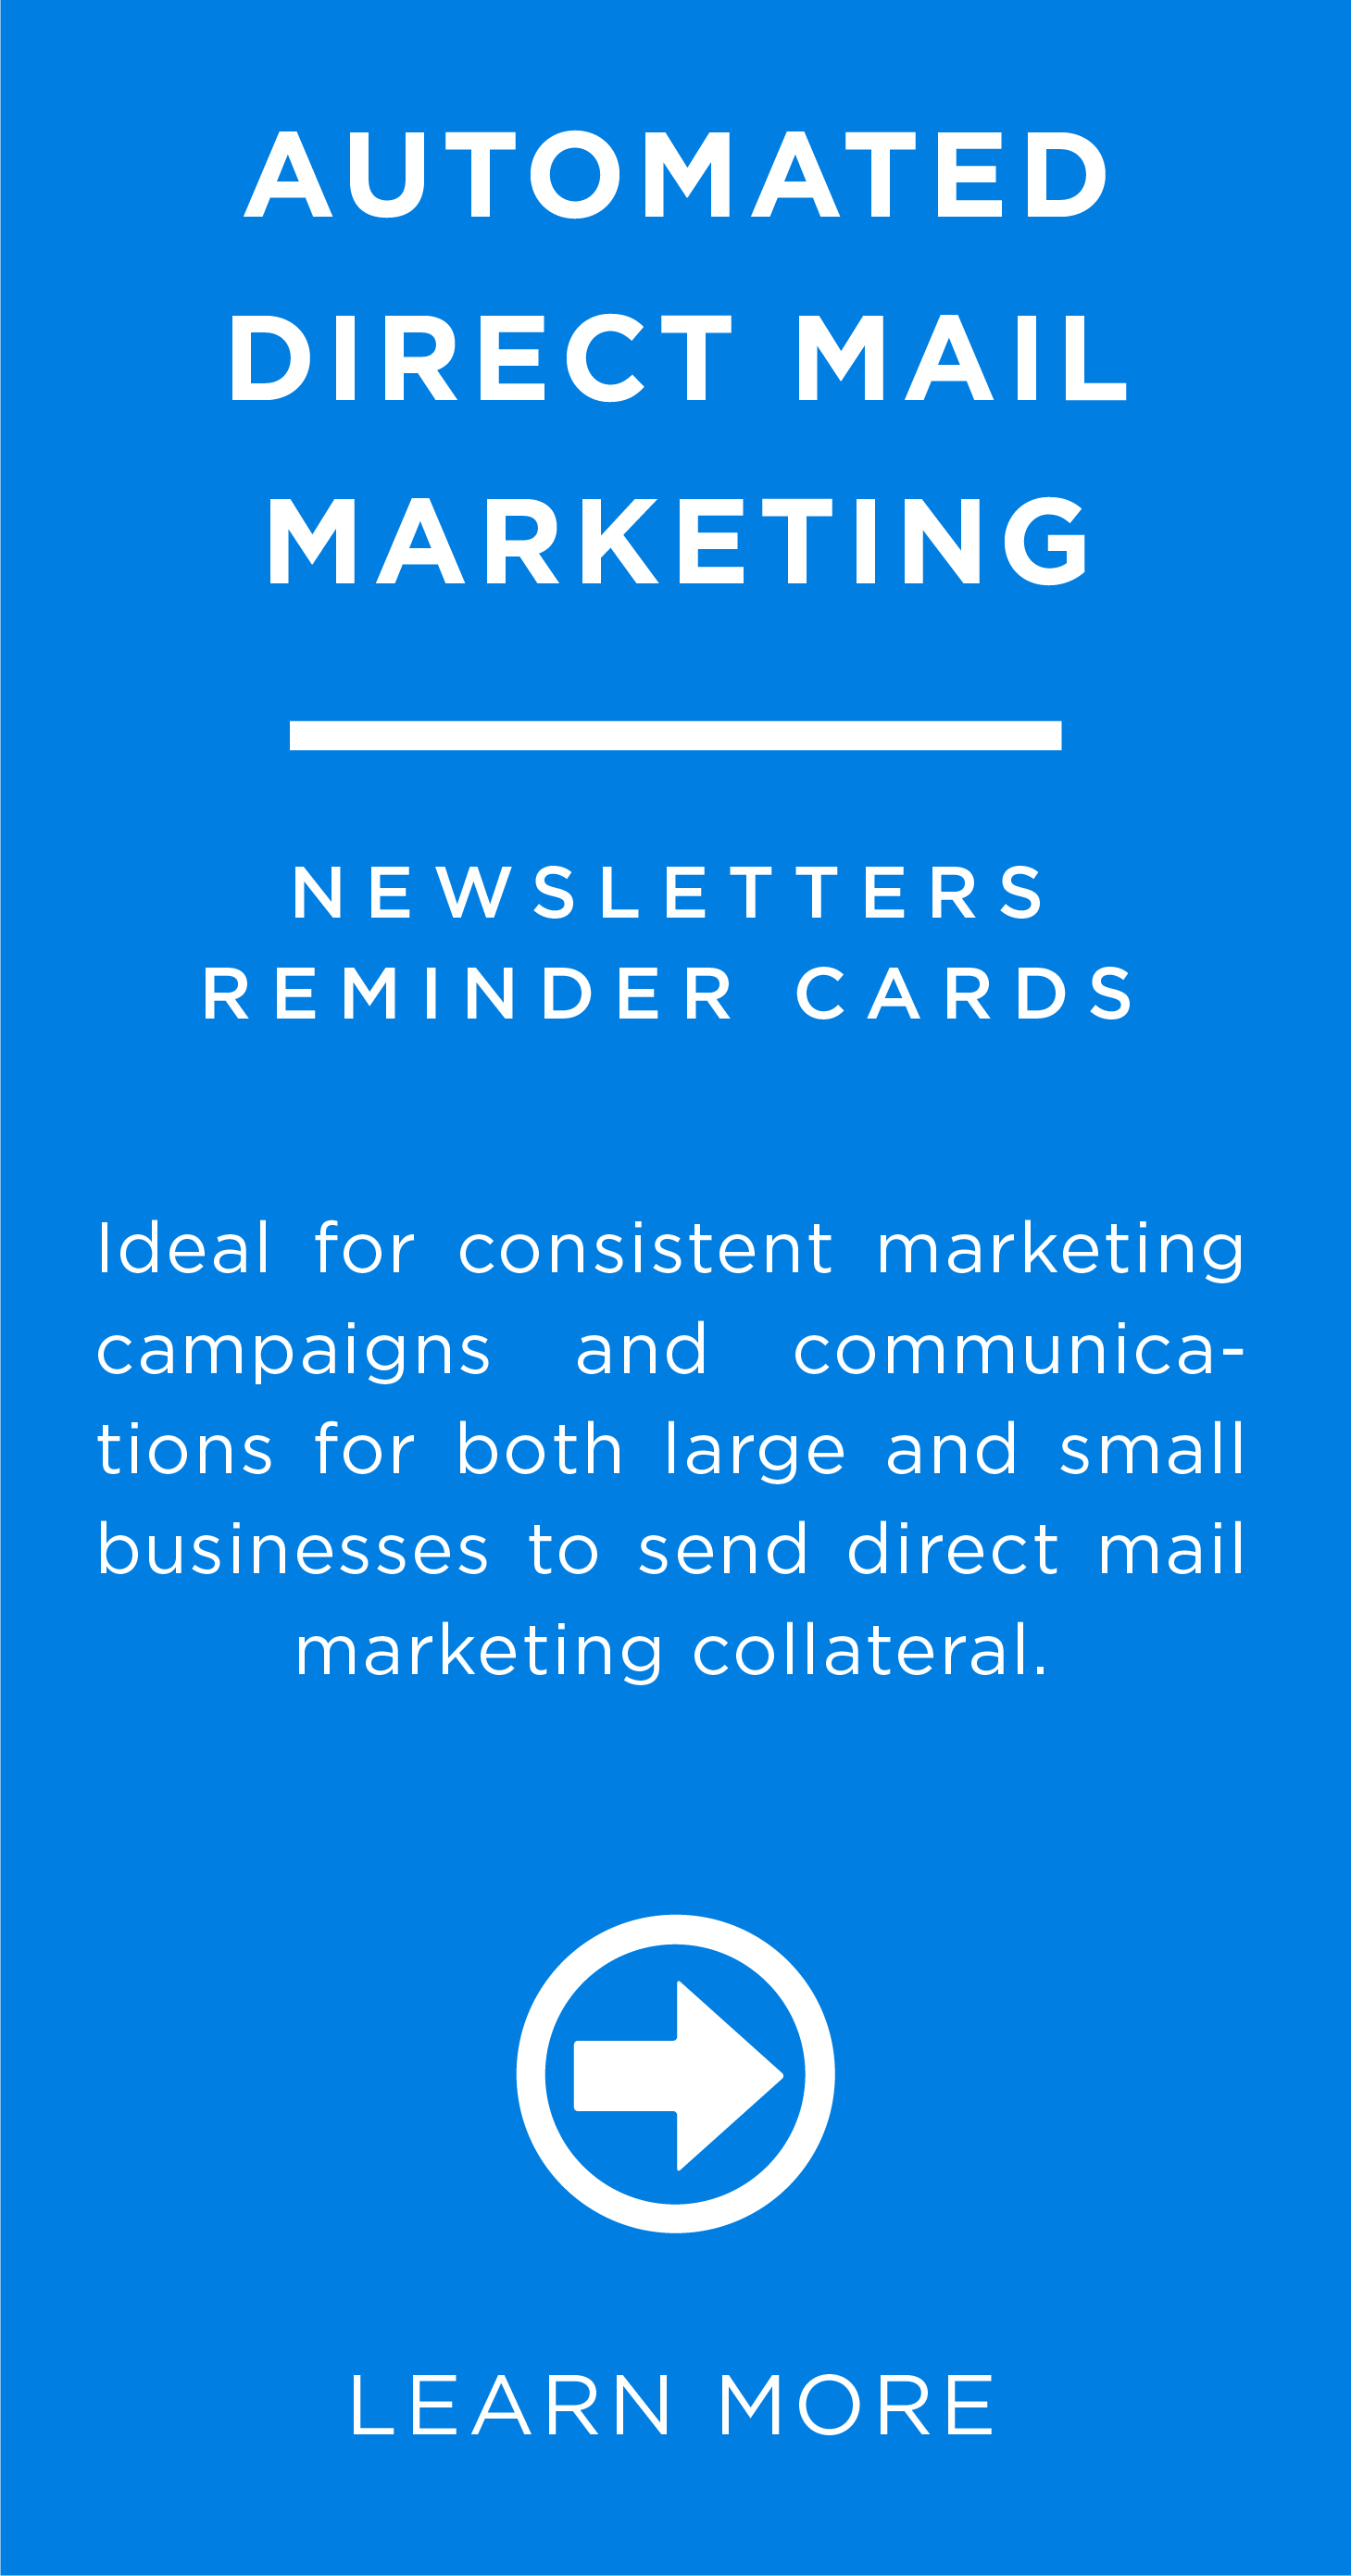 Ideal for consistent marketing campaigns and communications for both large and small businesses to send direct mail marketing collateral.